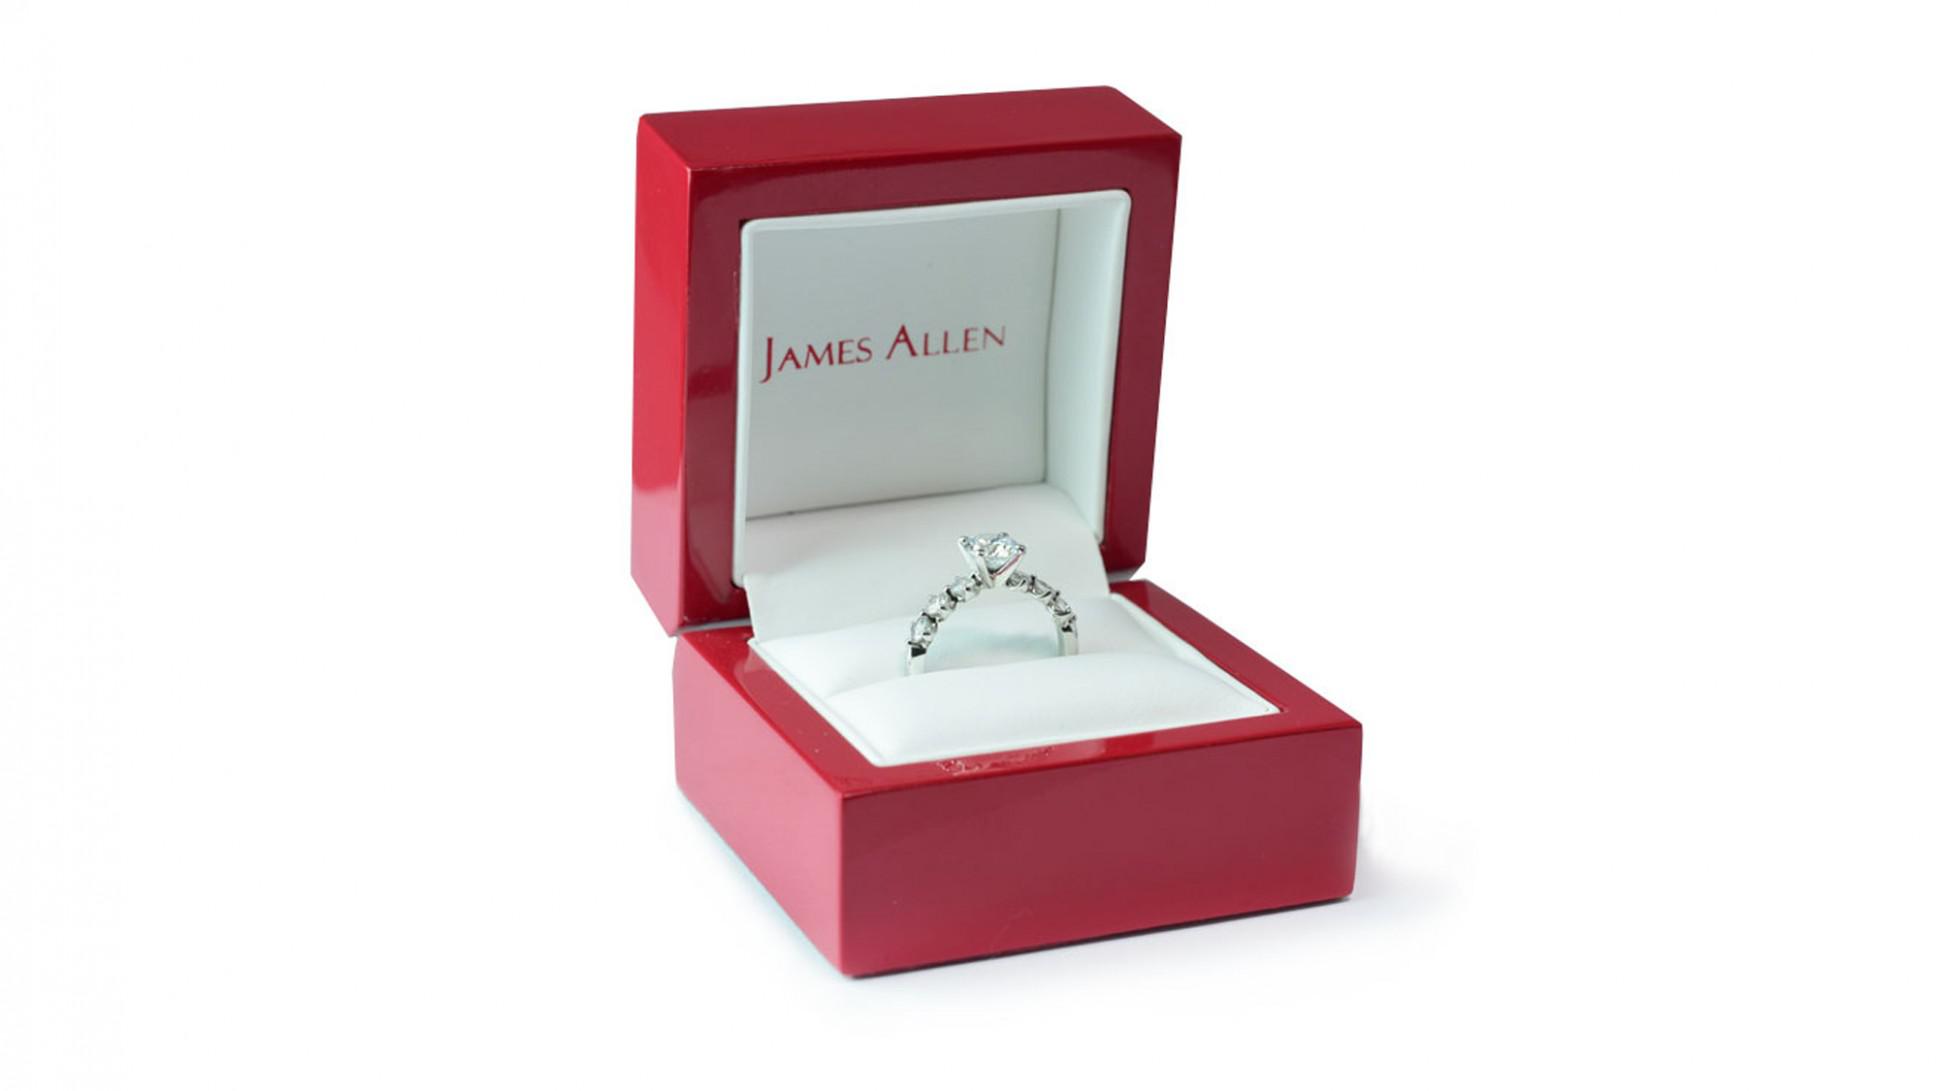 James Allen On How To Buy An Engagement Ring